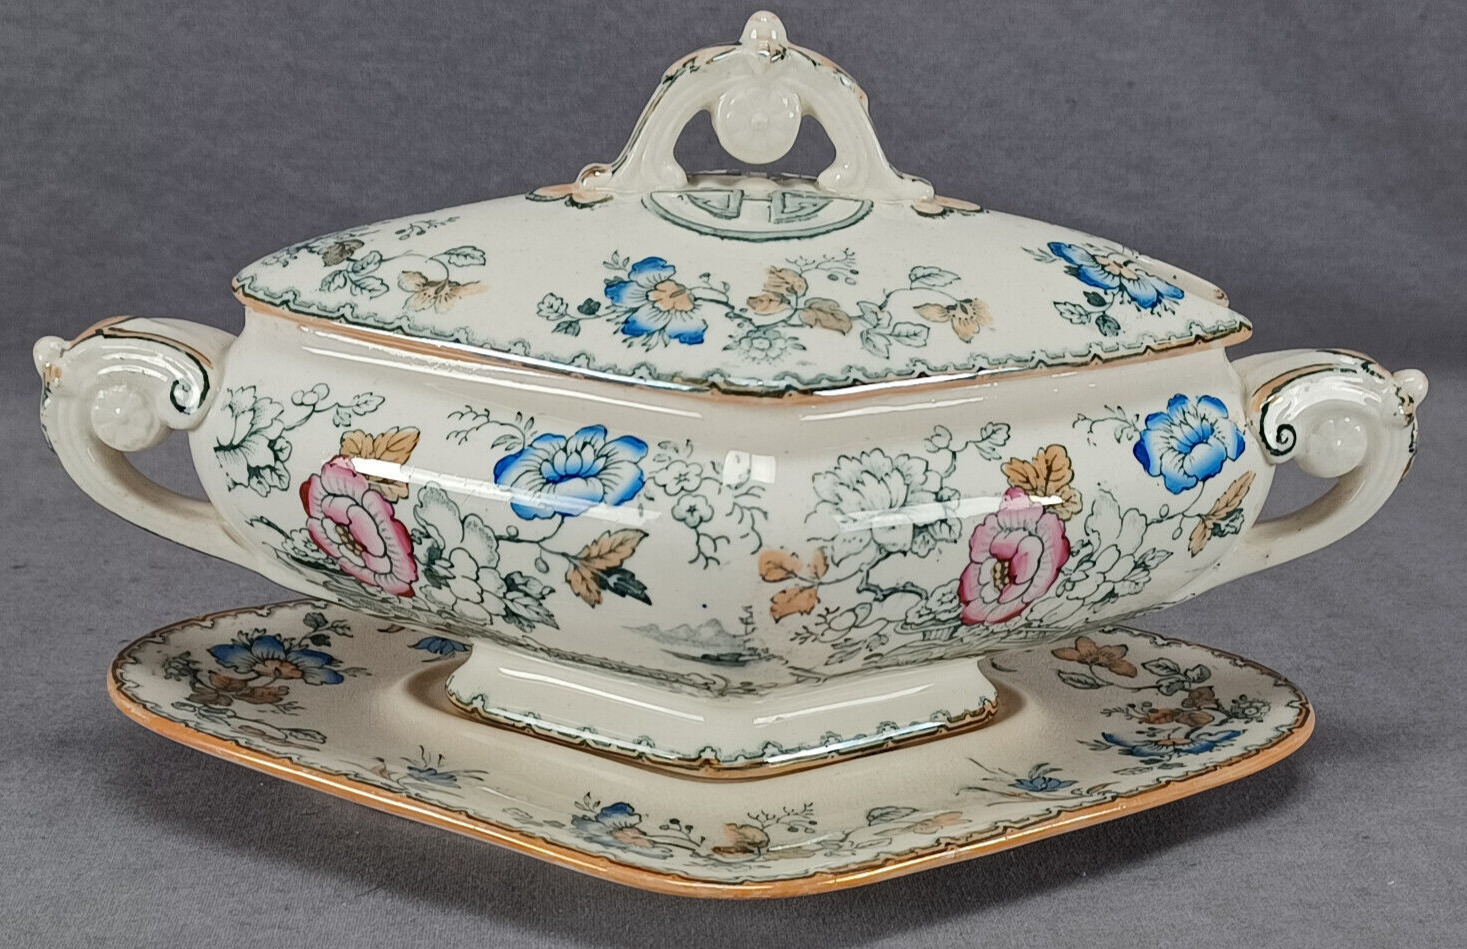 William Brownfield A9897 Hand Colored Transferware Sauce Tureen C. 1881